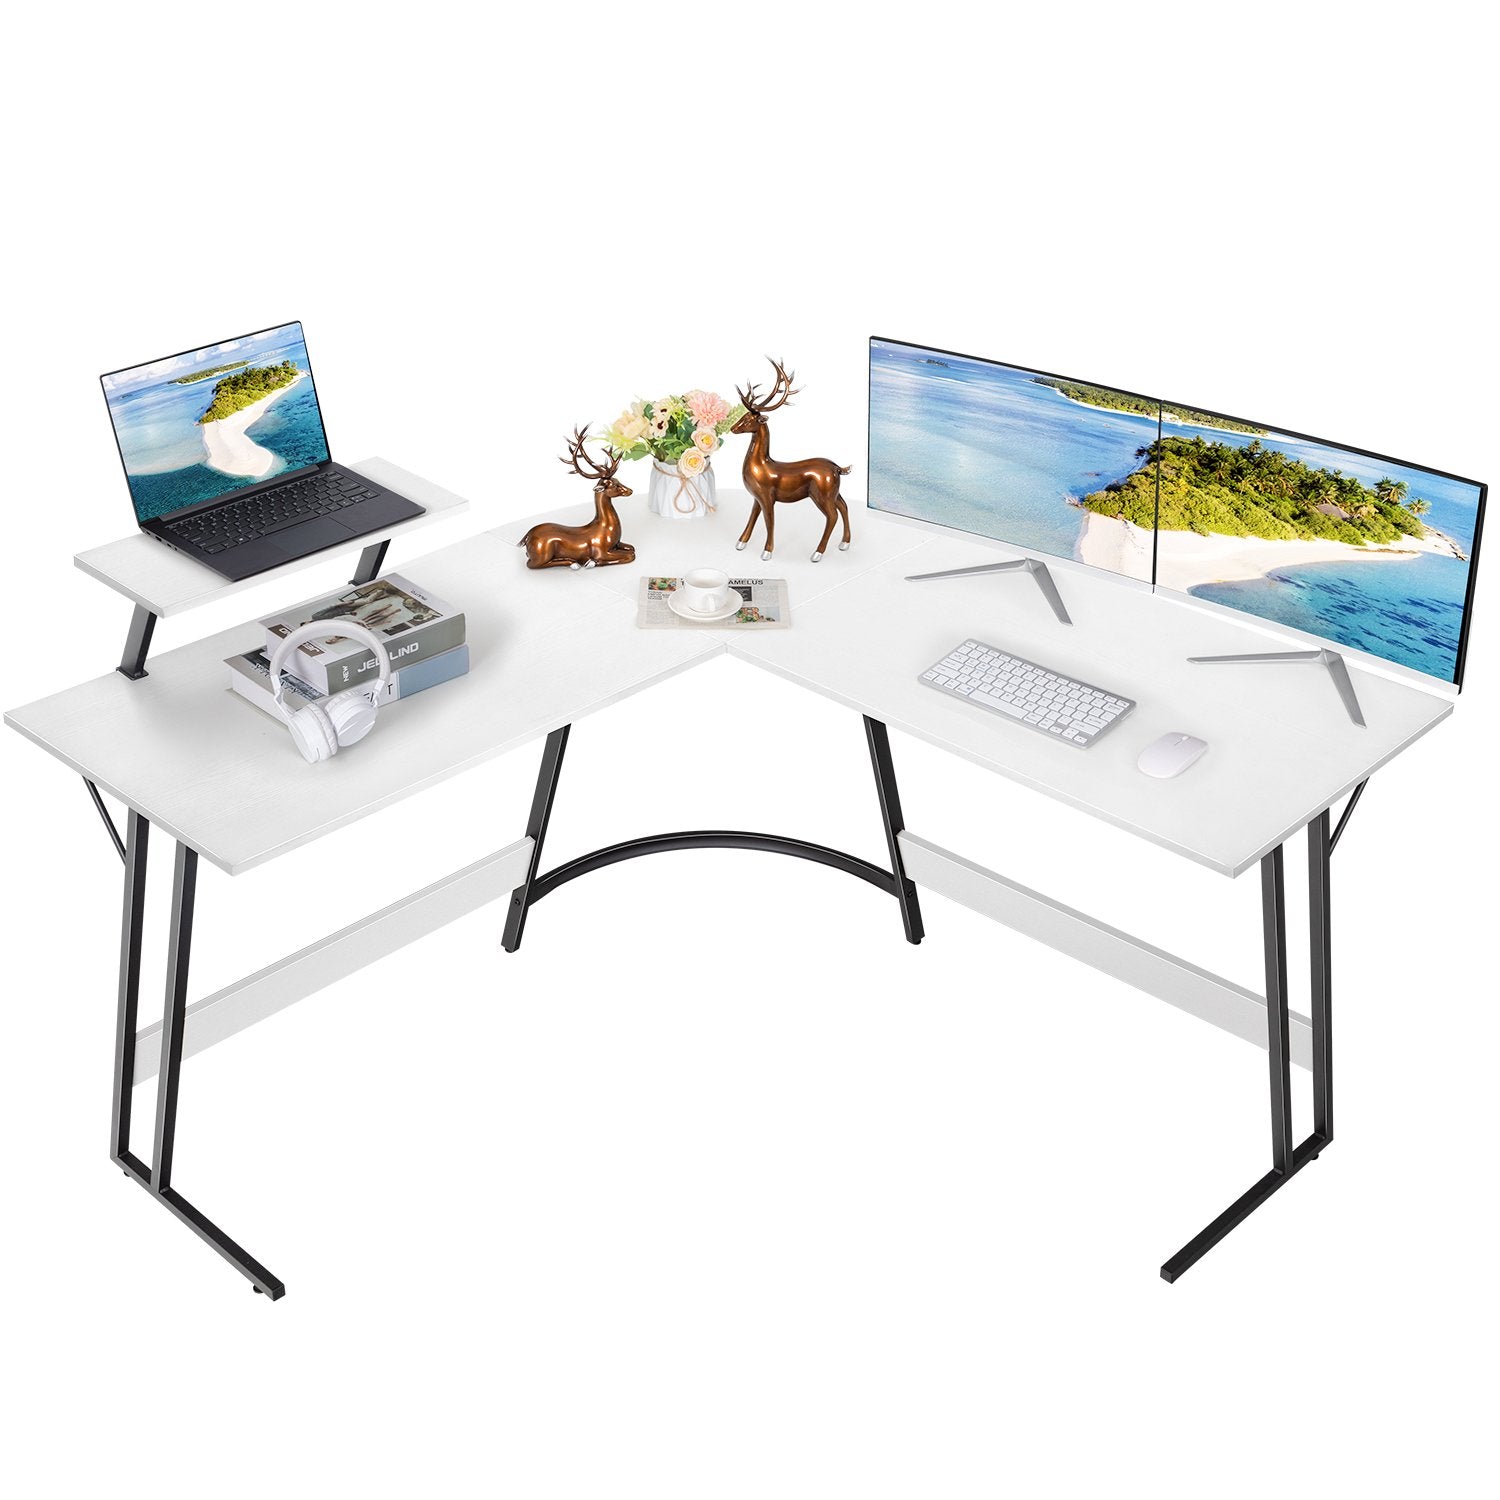 Homall 63 inches L-Shaped Height Adjustable Stand up Table, with